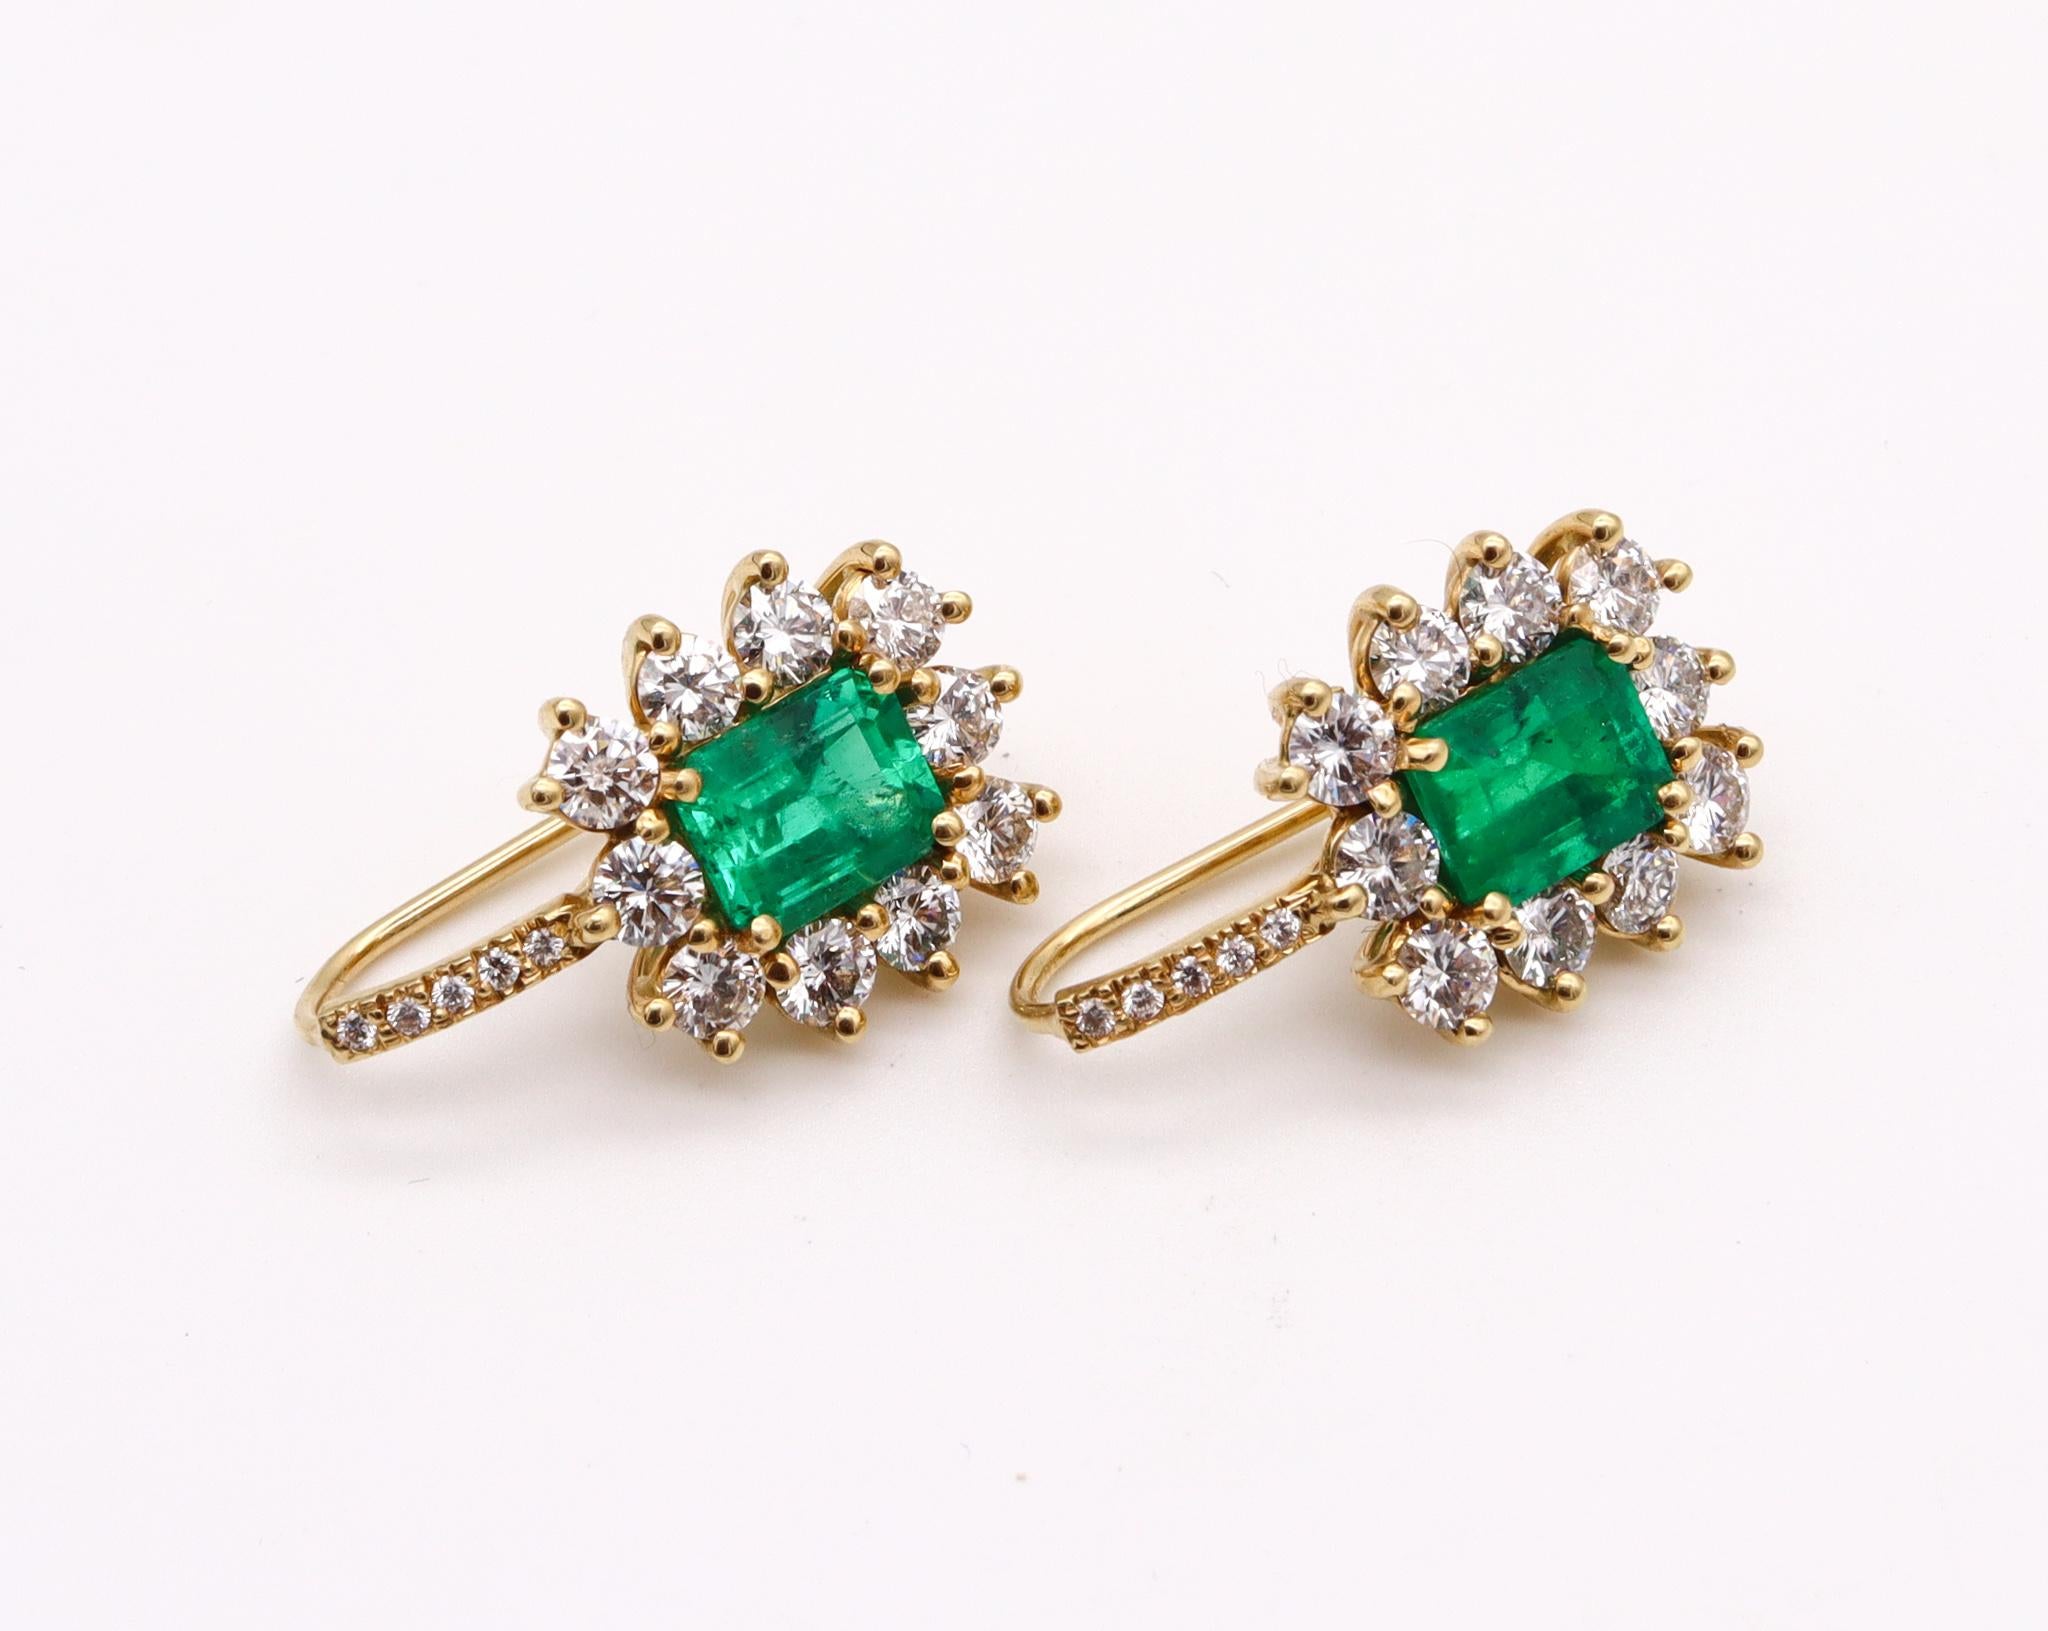 Contemporary French Hook Earrings in 18kt Yellow Gold with 4.92 Ctw in Diamonds and Emeralds